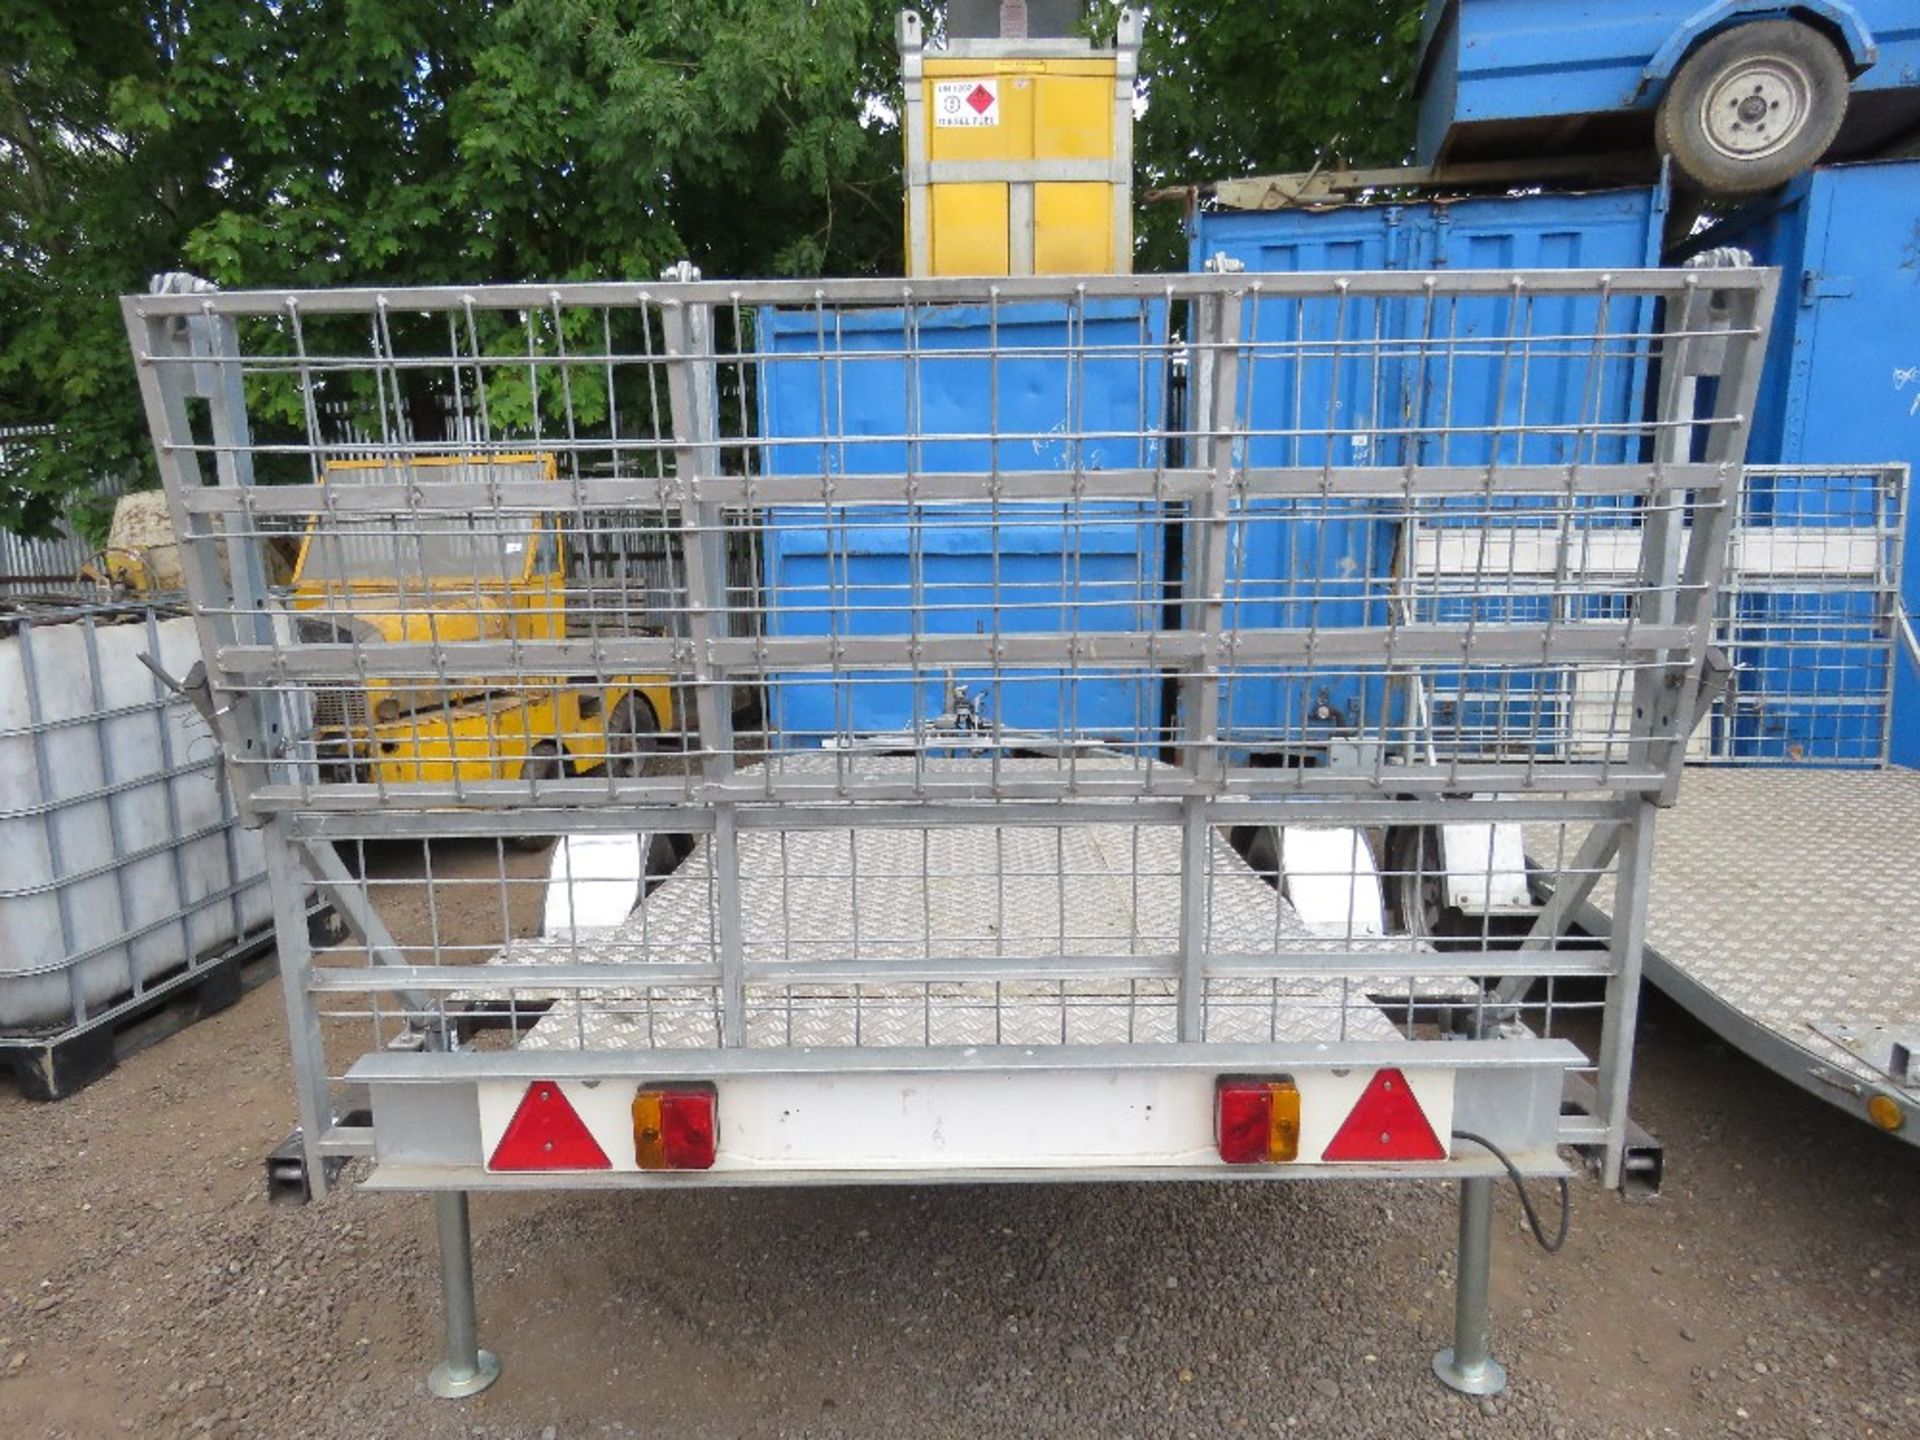 SINGLE AXLED QUAD BIKE / FLAT TRAILER 1.8M WIDE X 2.4M LENGTH BED APPROX. SOURCED FROM LIQUIDATION. - Image 2 of 6